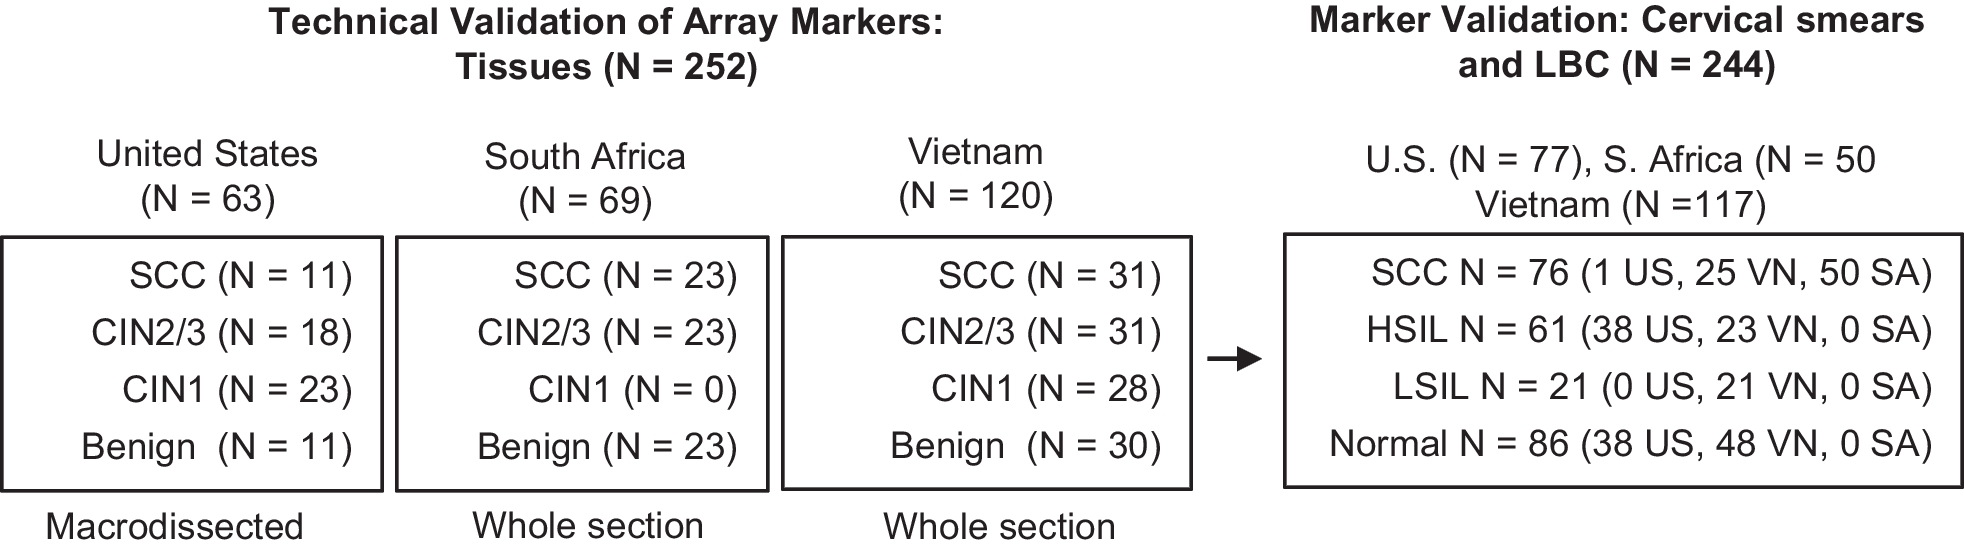 Discovery and technical validation of high-performance methylated DNA markers for the detection of cervical lesions at risk of malignant progression in low- and middle-income countries